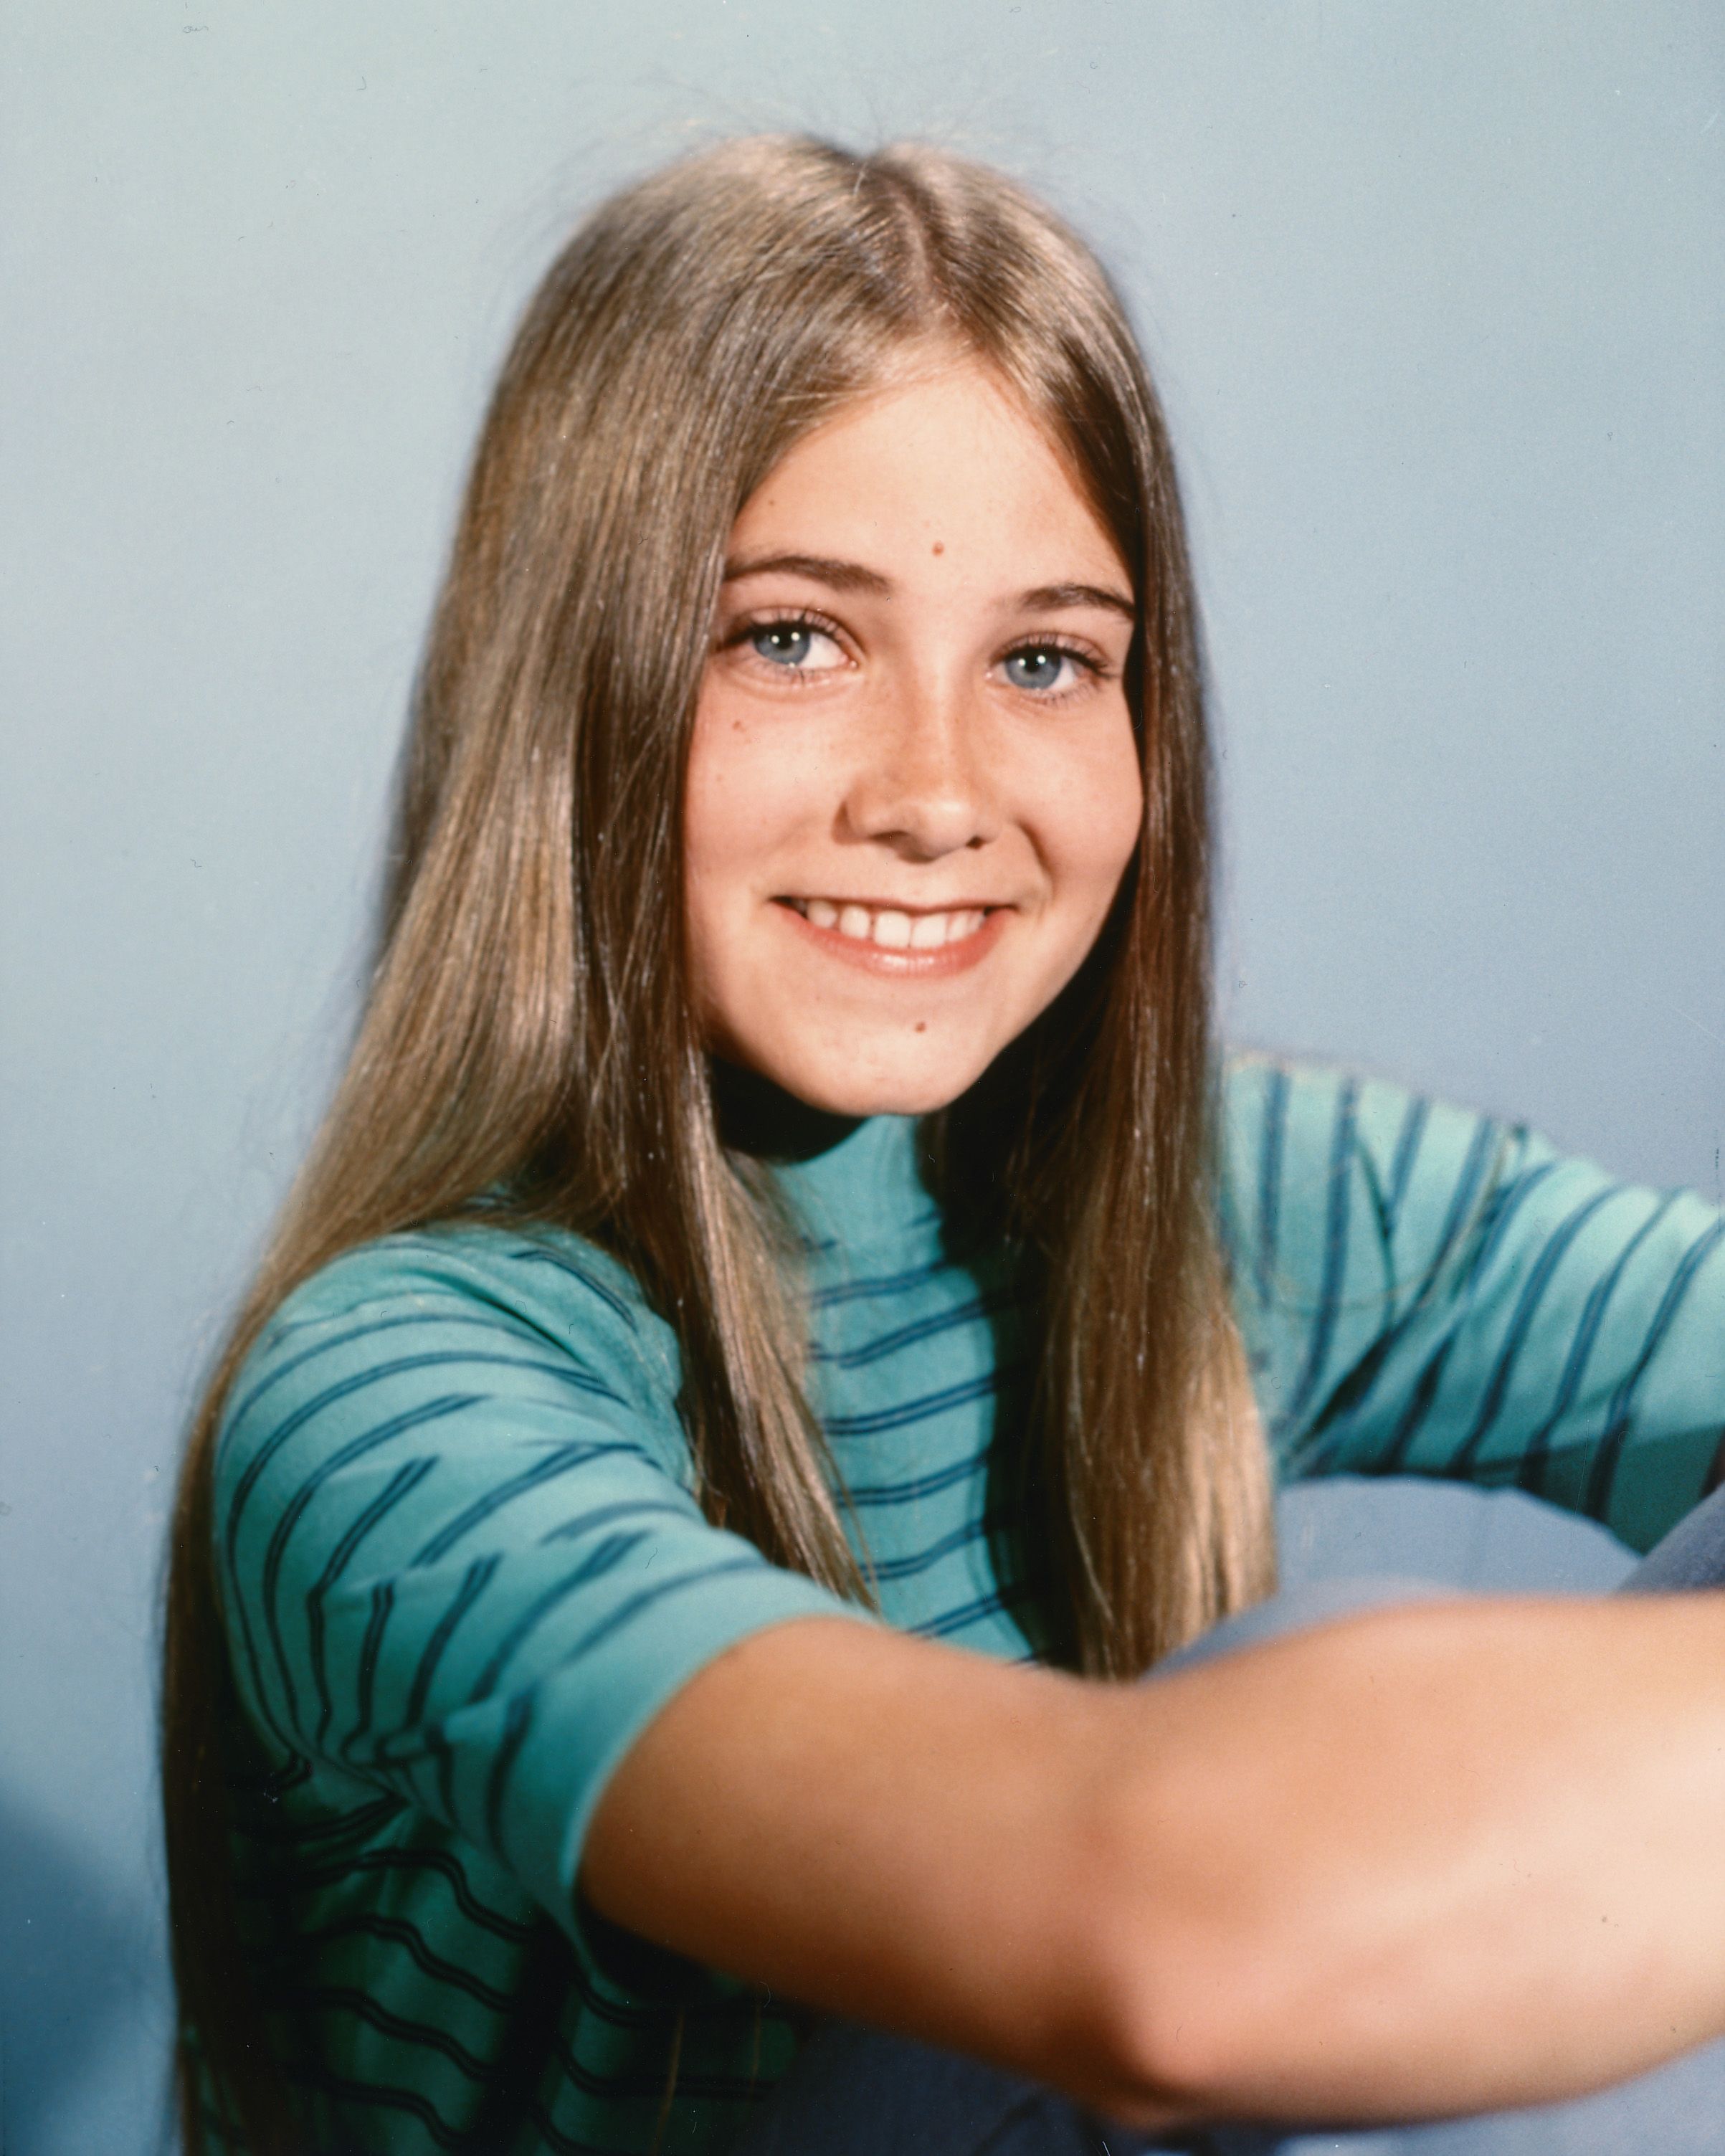 The Cast Of The Brady Bunch Then And Now The Brady Bunch Photos